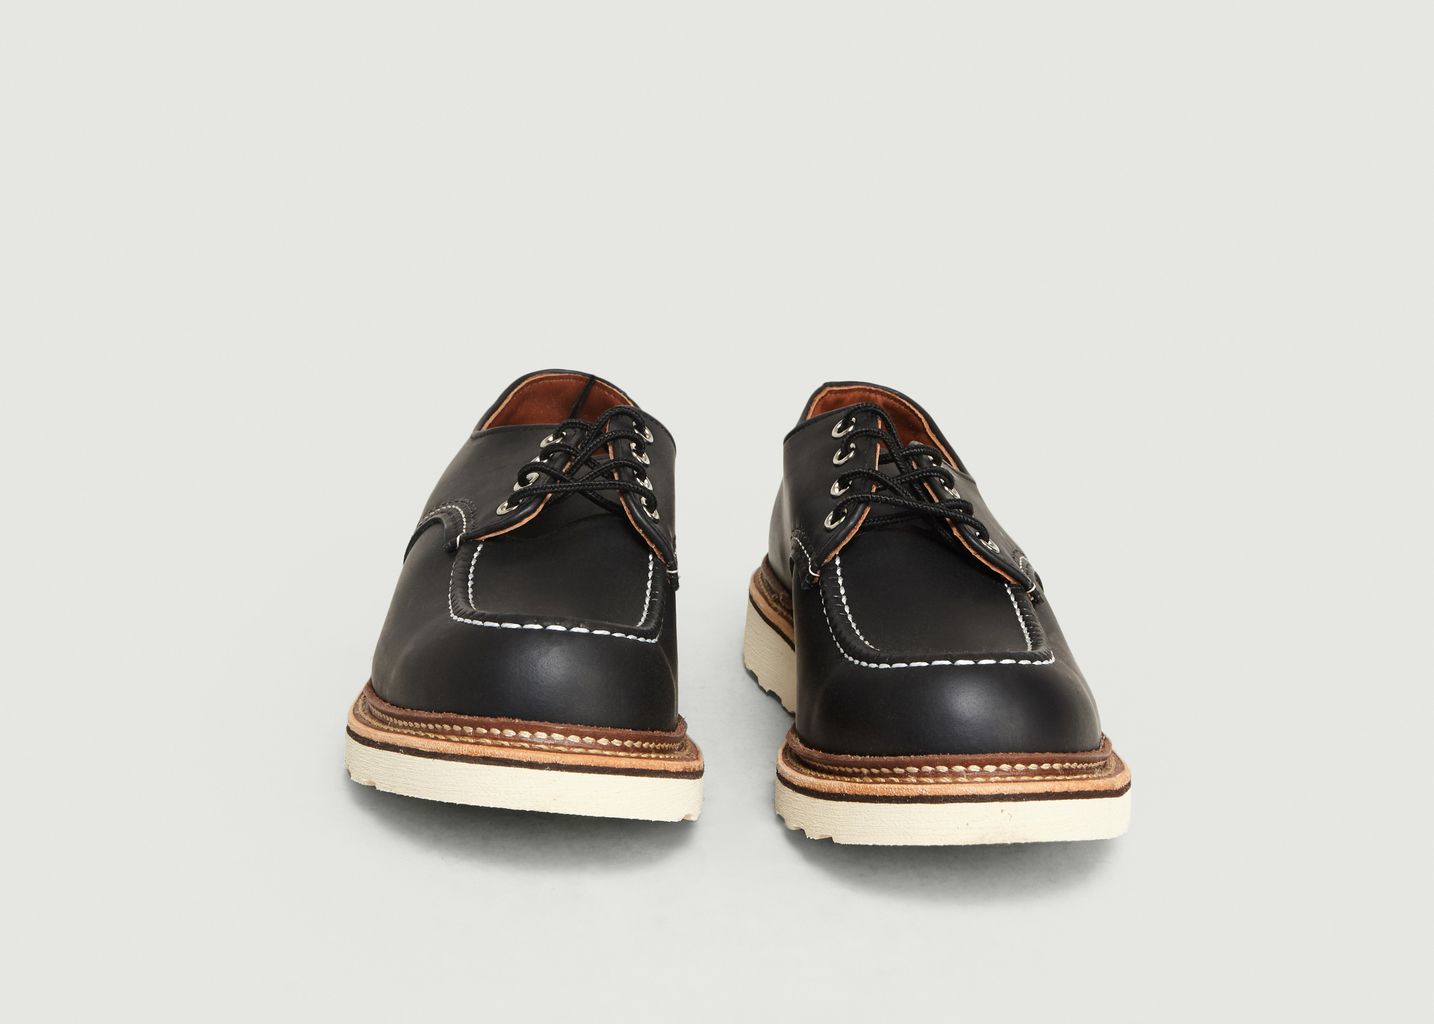 Mocassins Classic Oxford 8106 - Red Wing Shoes